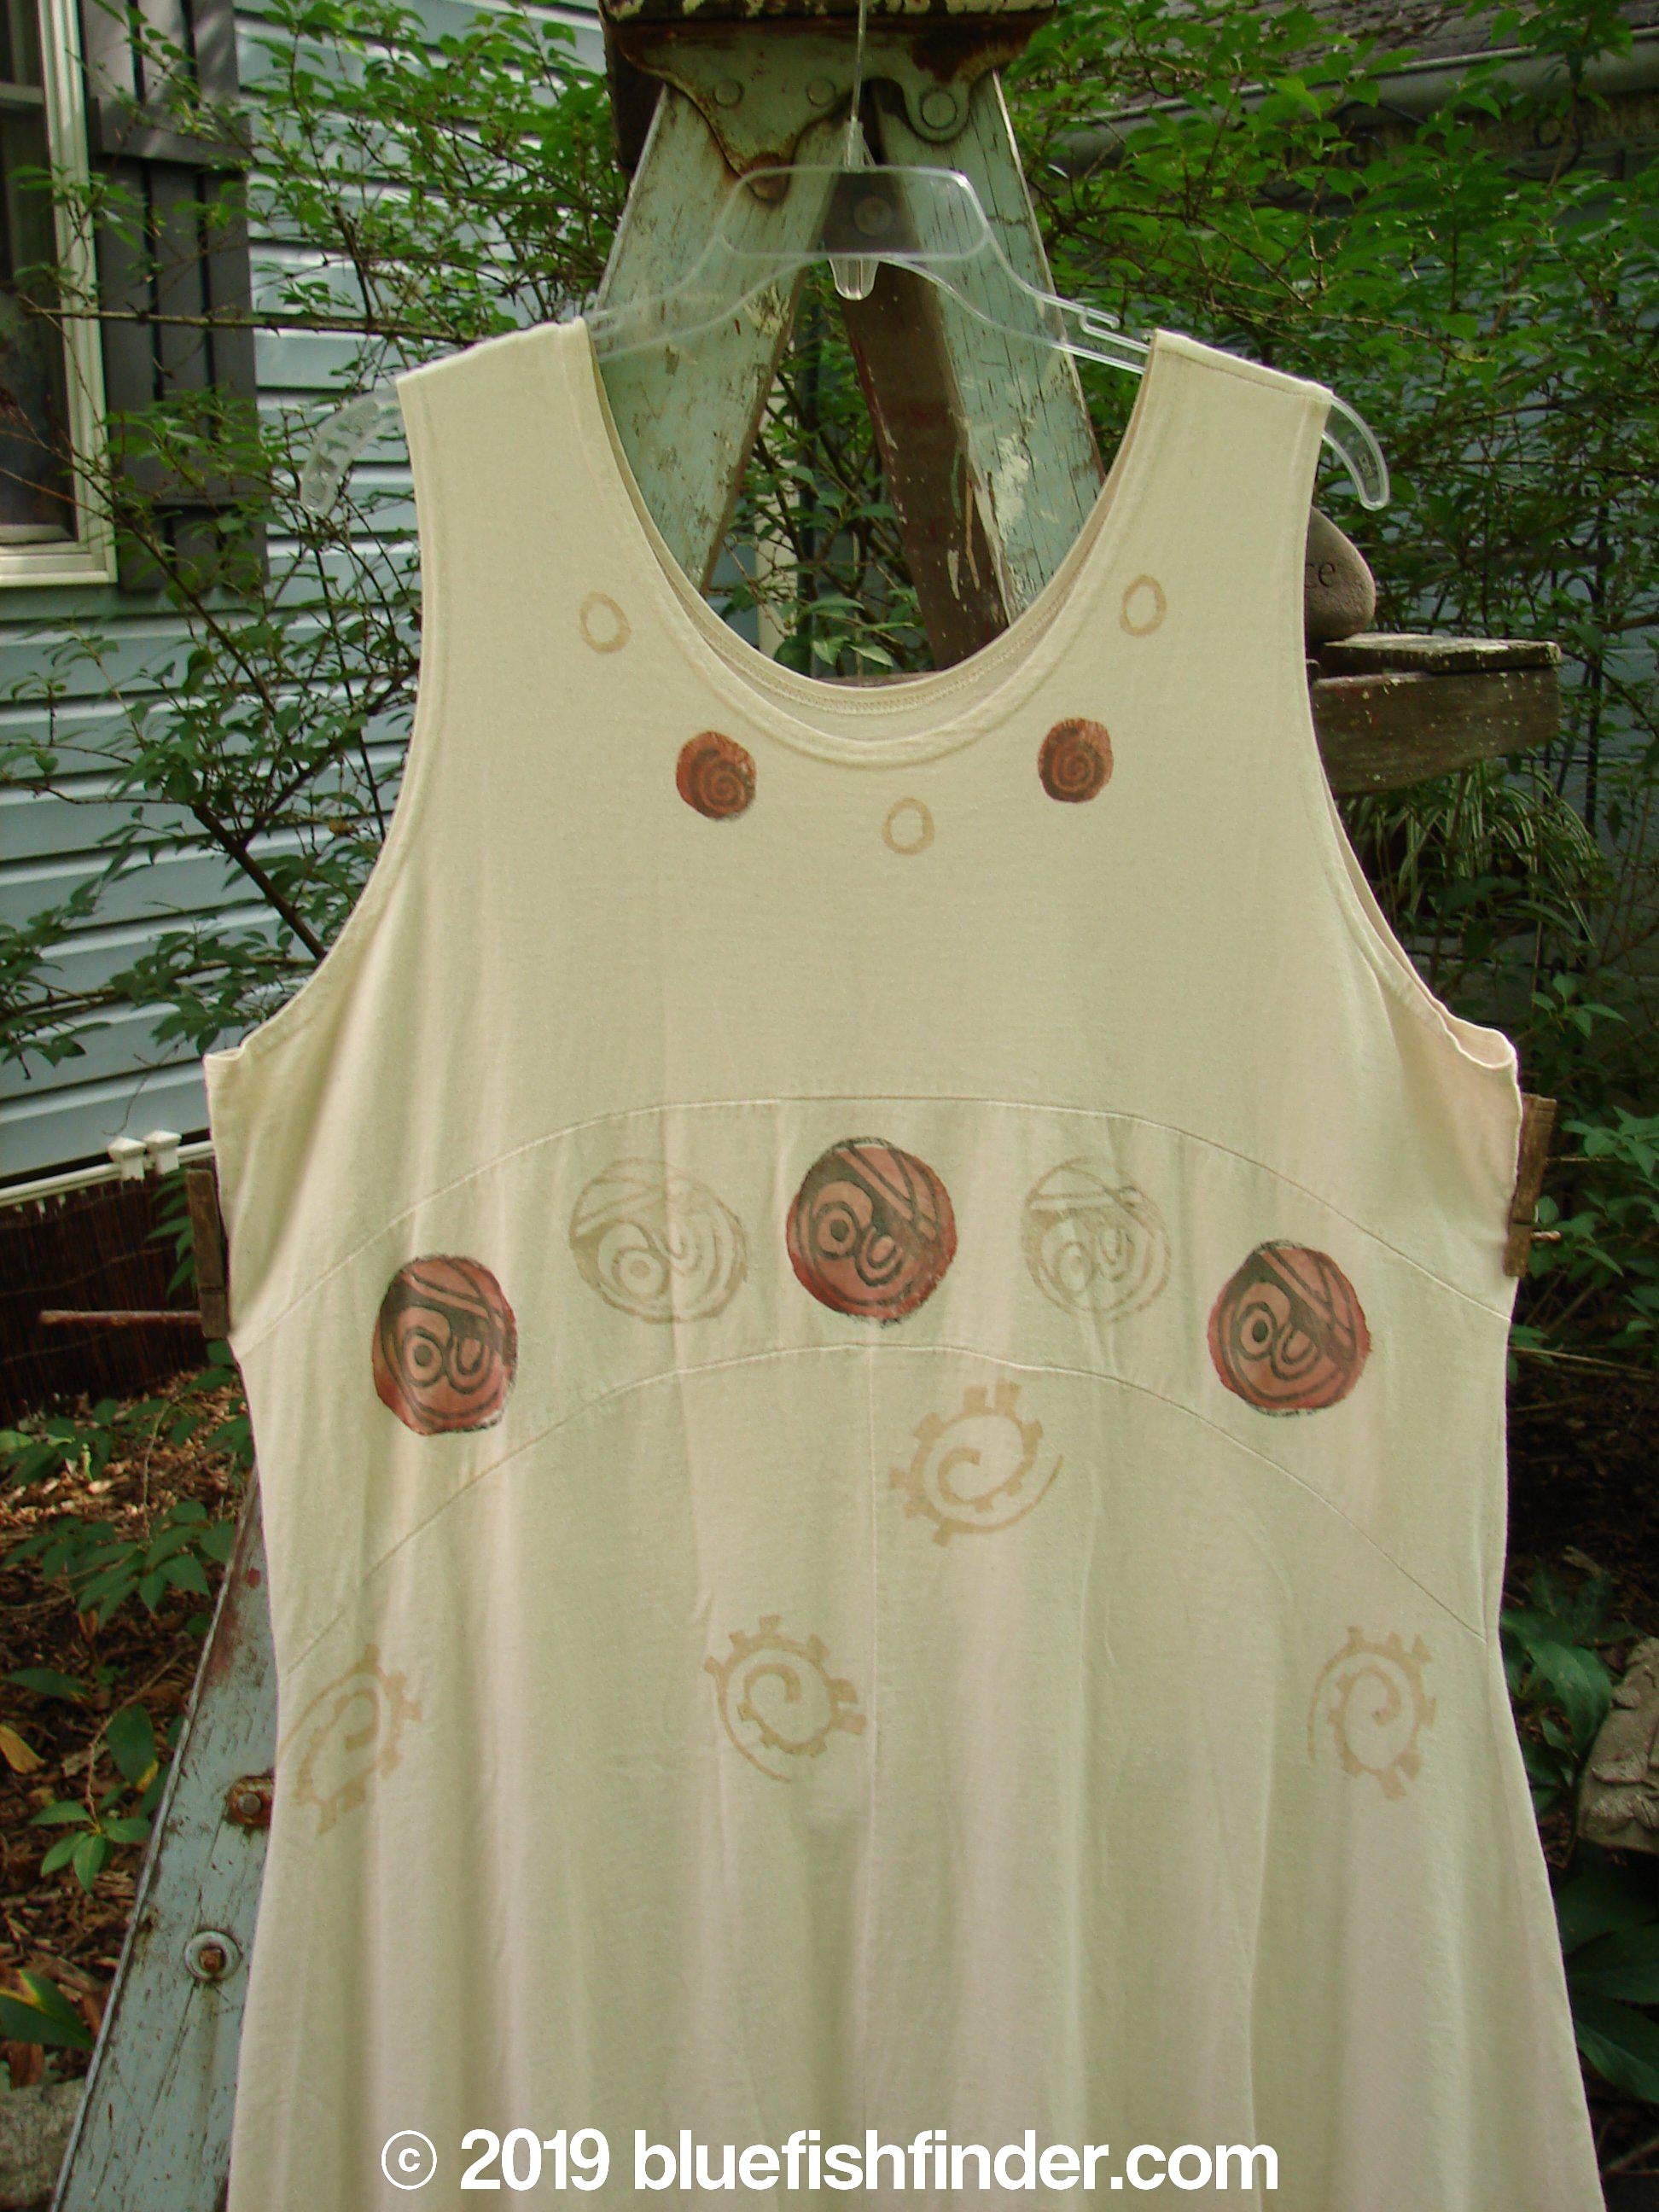 1995 Zelda Jumper Dress Abstract Champagne Size 2: A white dress with circles on it, featuring a rounded neckline and an A-line shape.